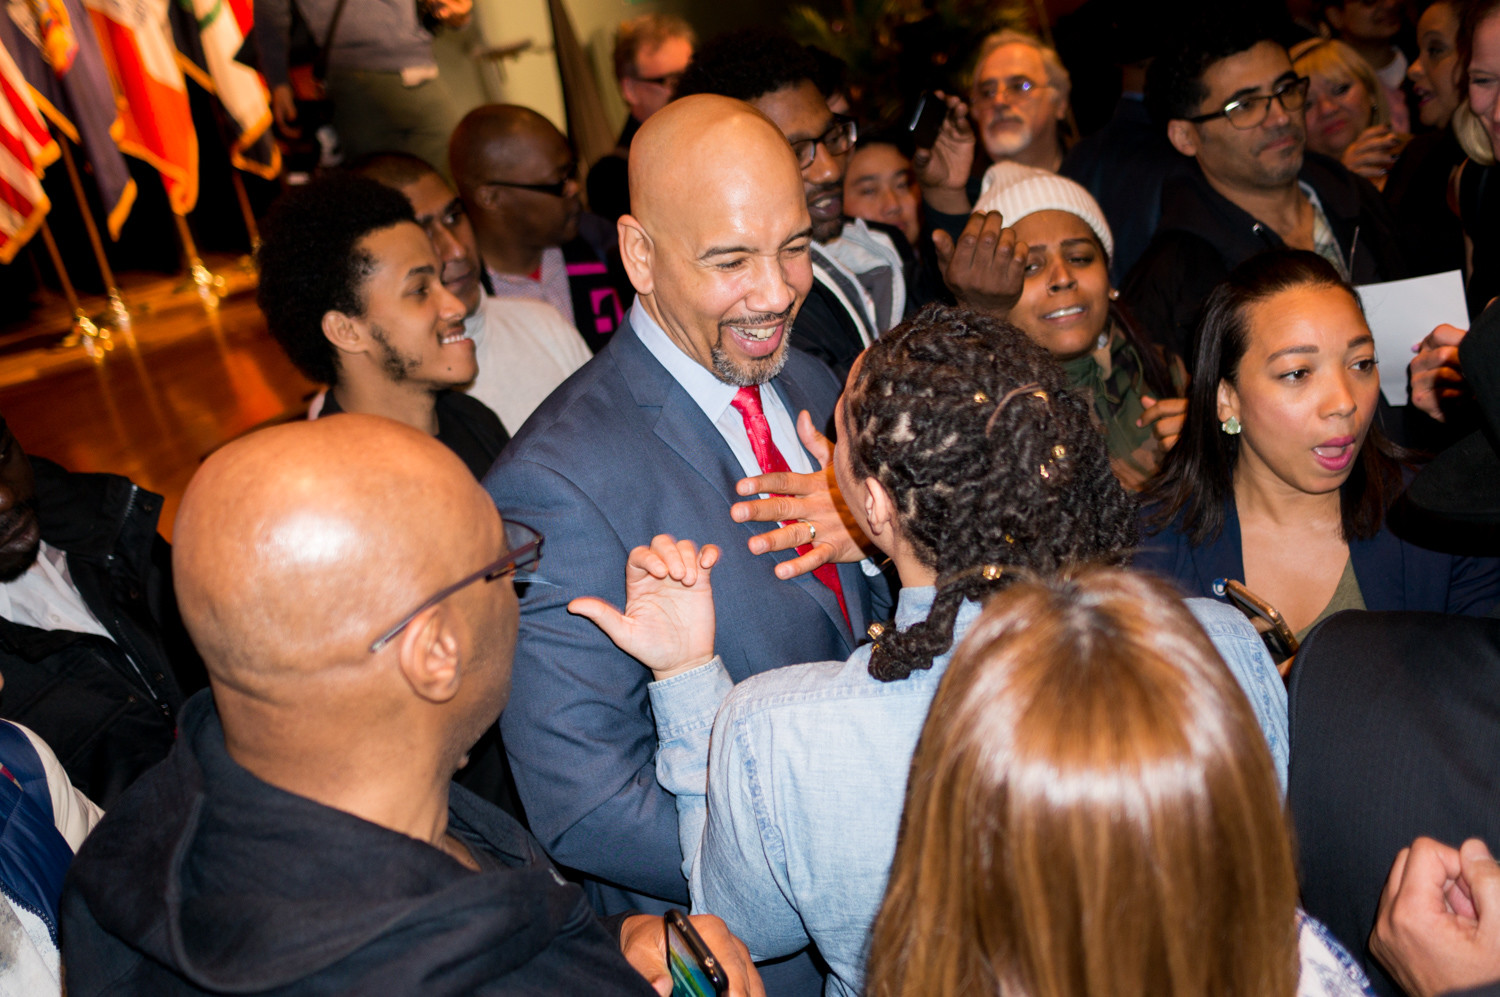 Bronx borough president Ruben Diaz Jr., speaks with audience members after the state of the borough address at the Bronx High School of Science last week.